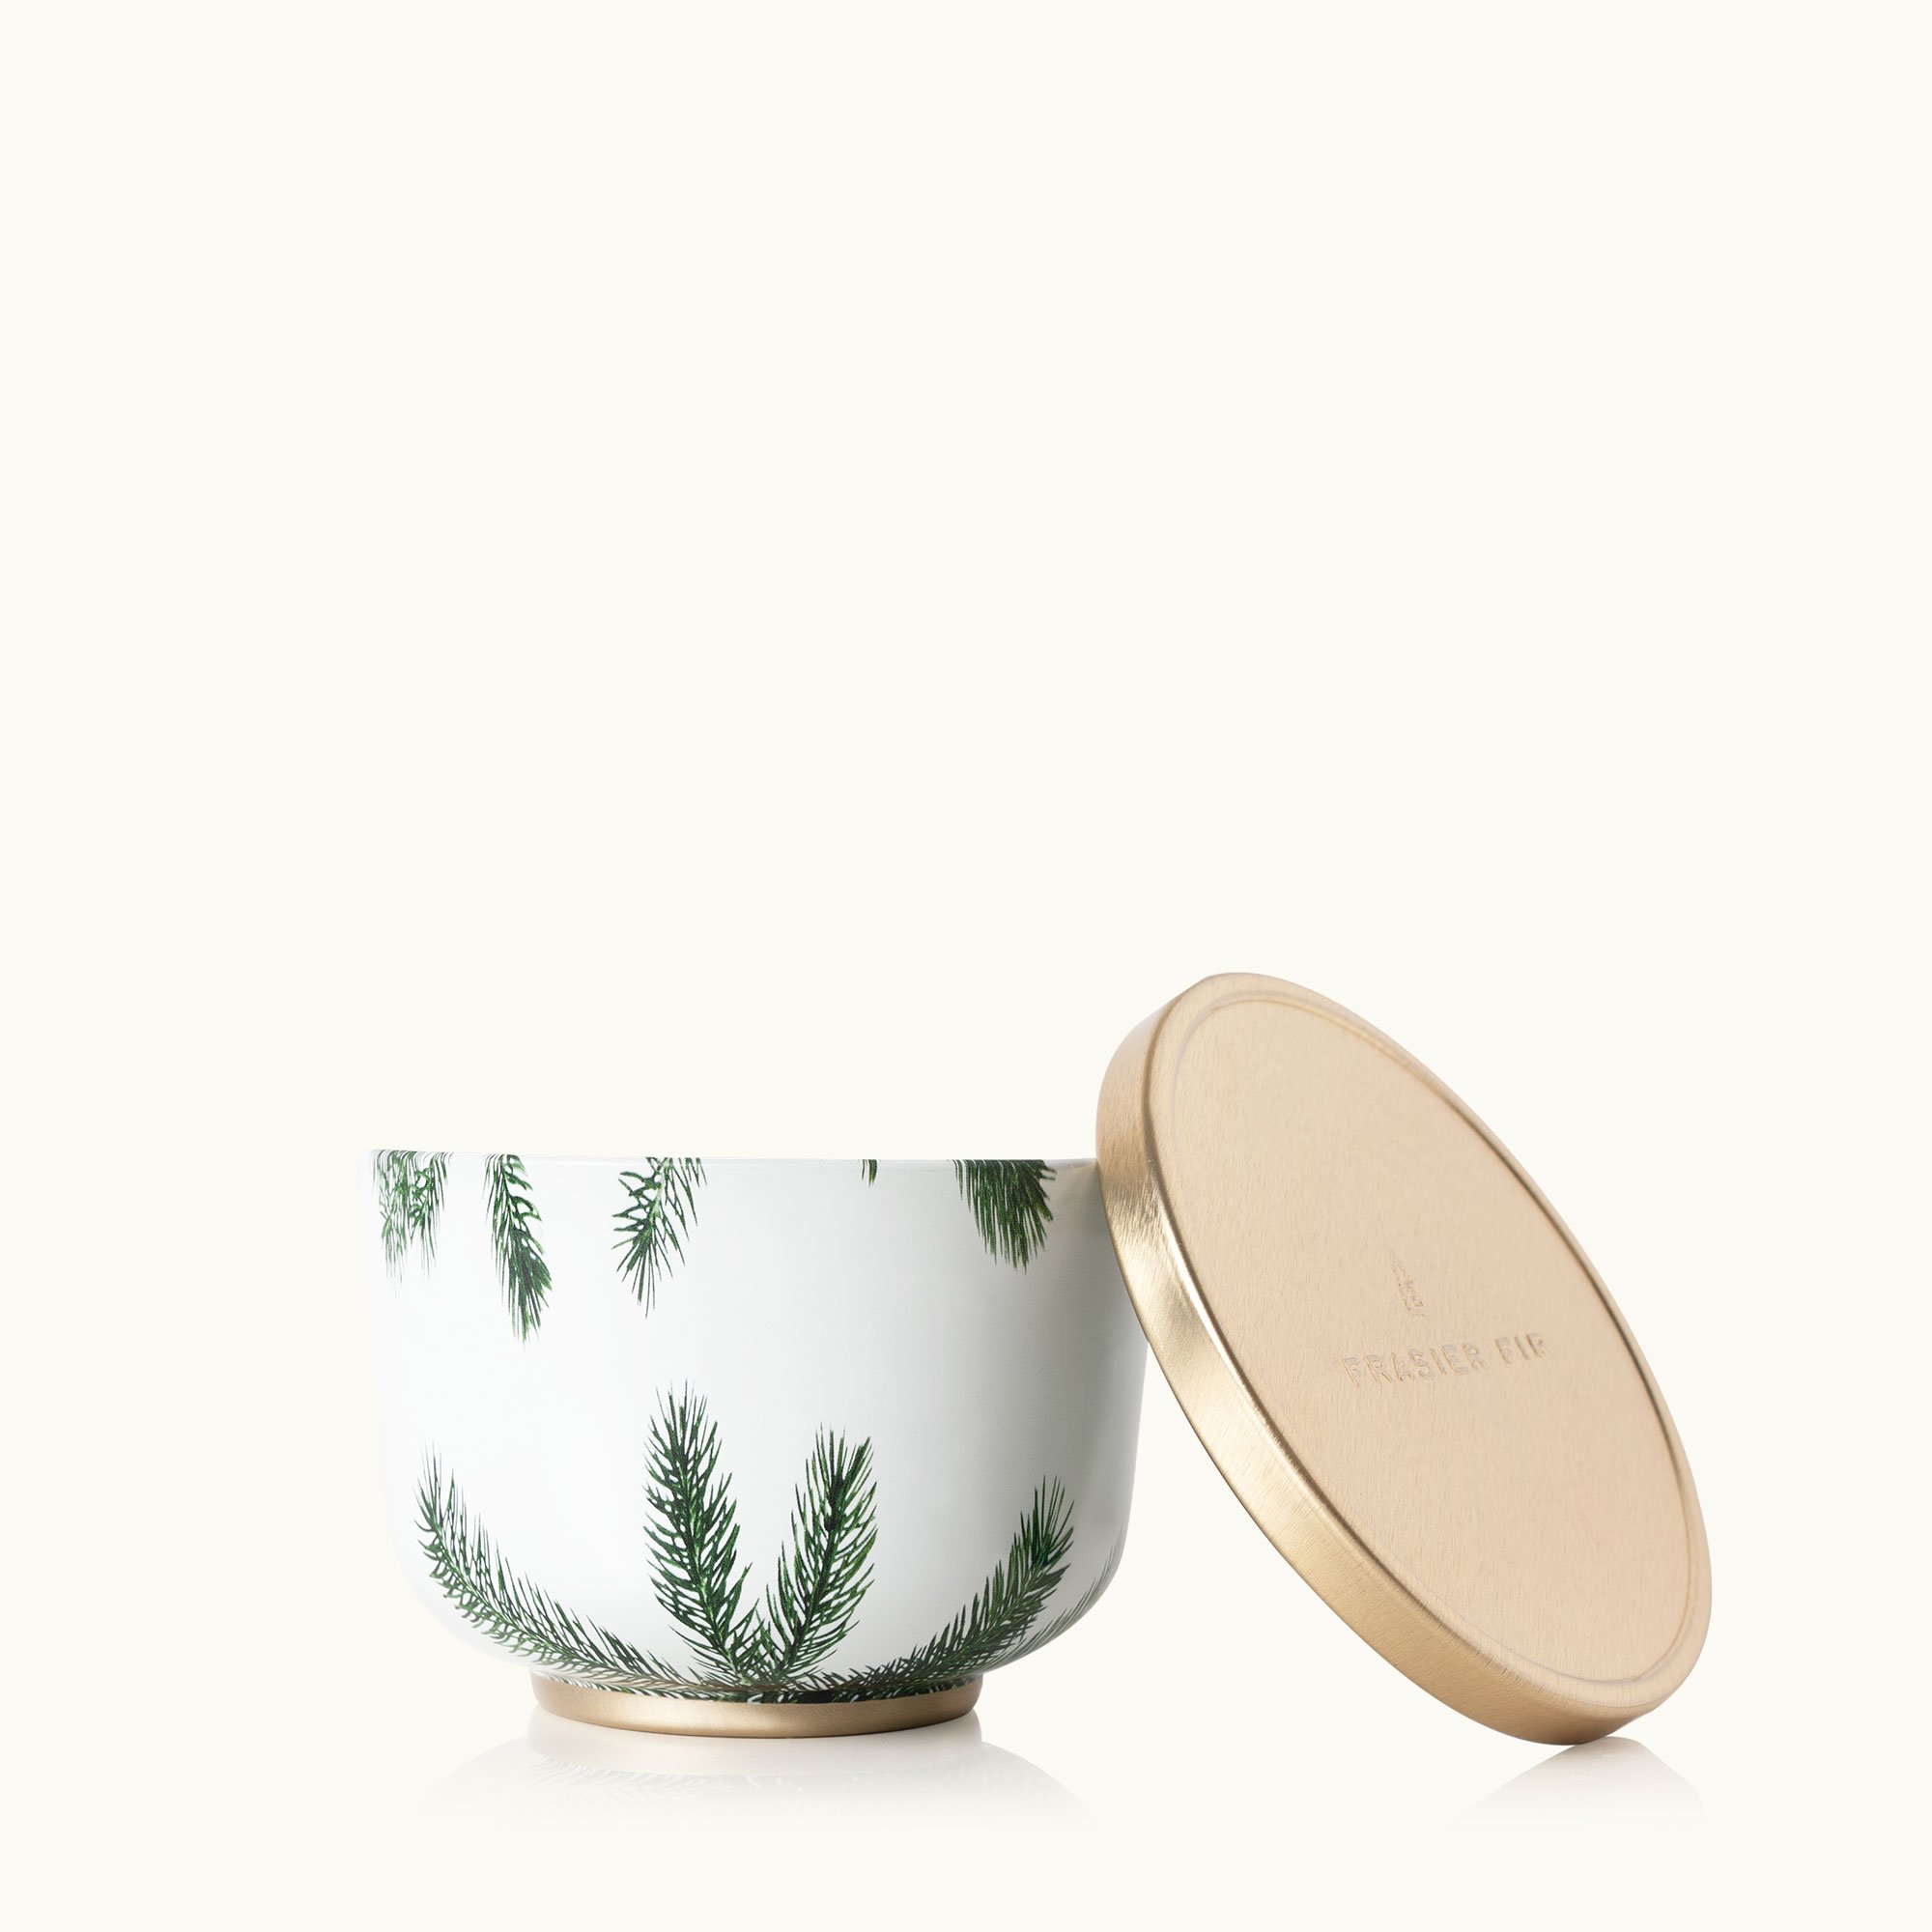 Thymes Frasier Fir Gilded Gold Poured Candle 6.5 oz